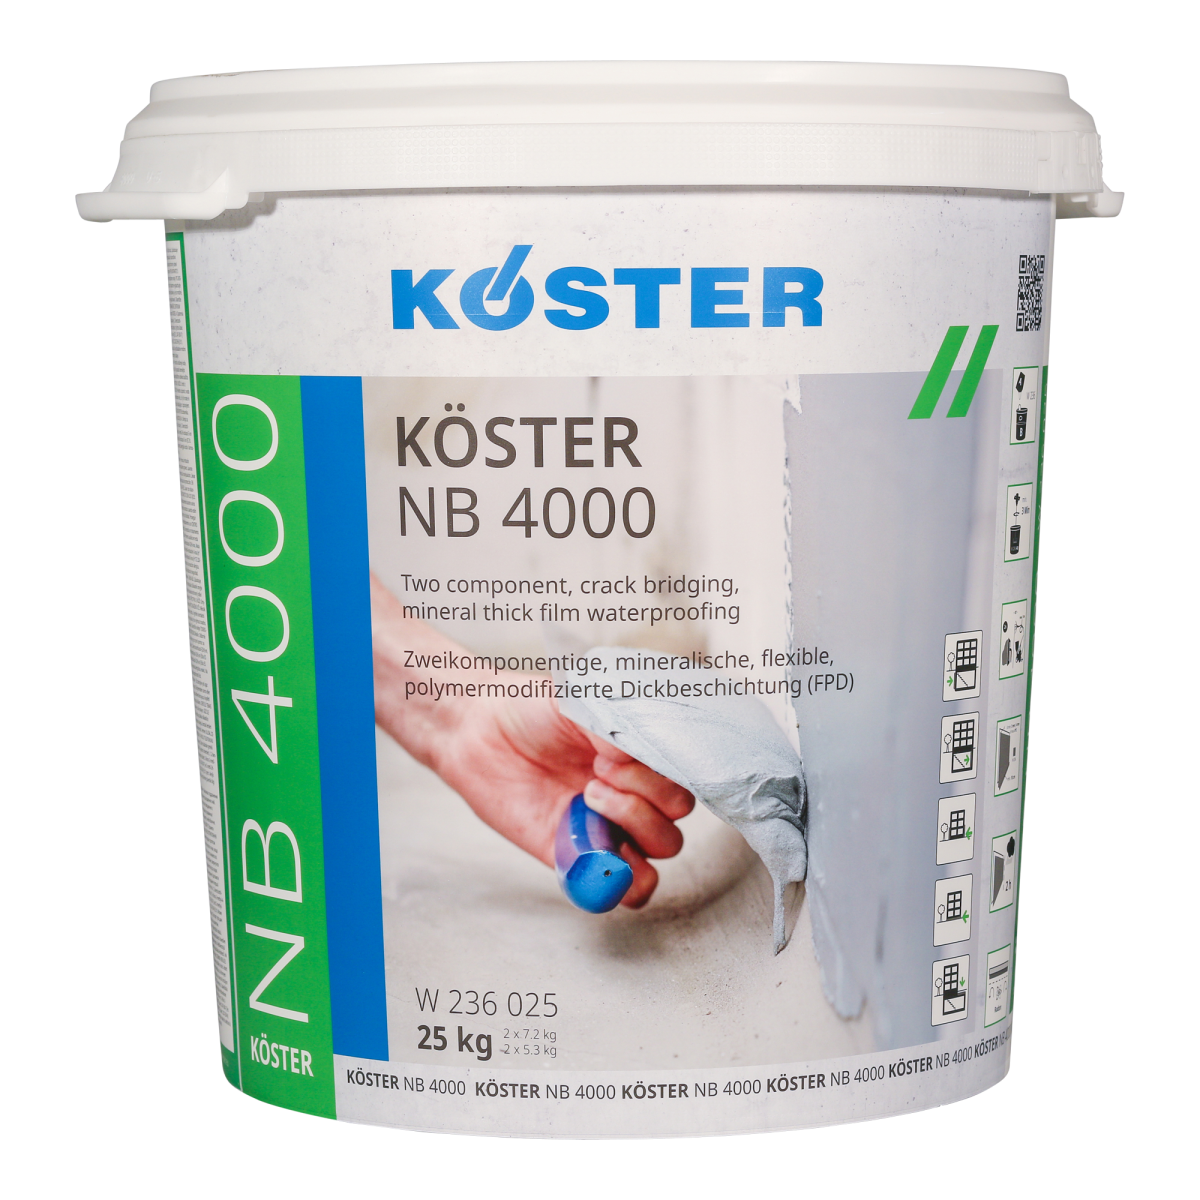 koster-nb-4000